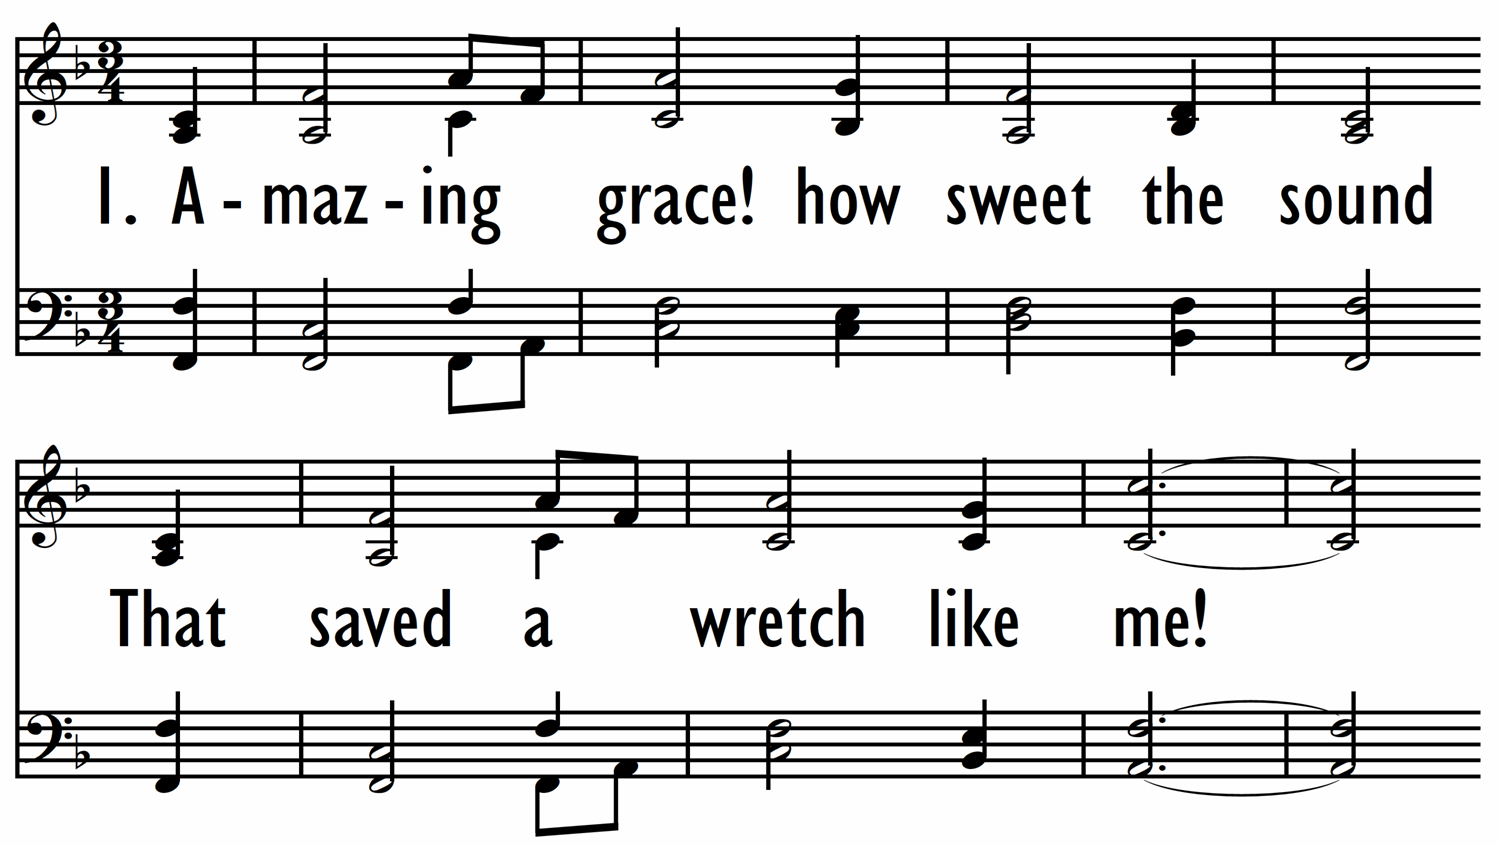 AMAZING GRACE! HOW SWEET THE SOUND - with opt last st. setting-ppt